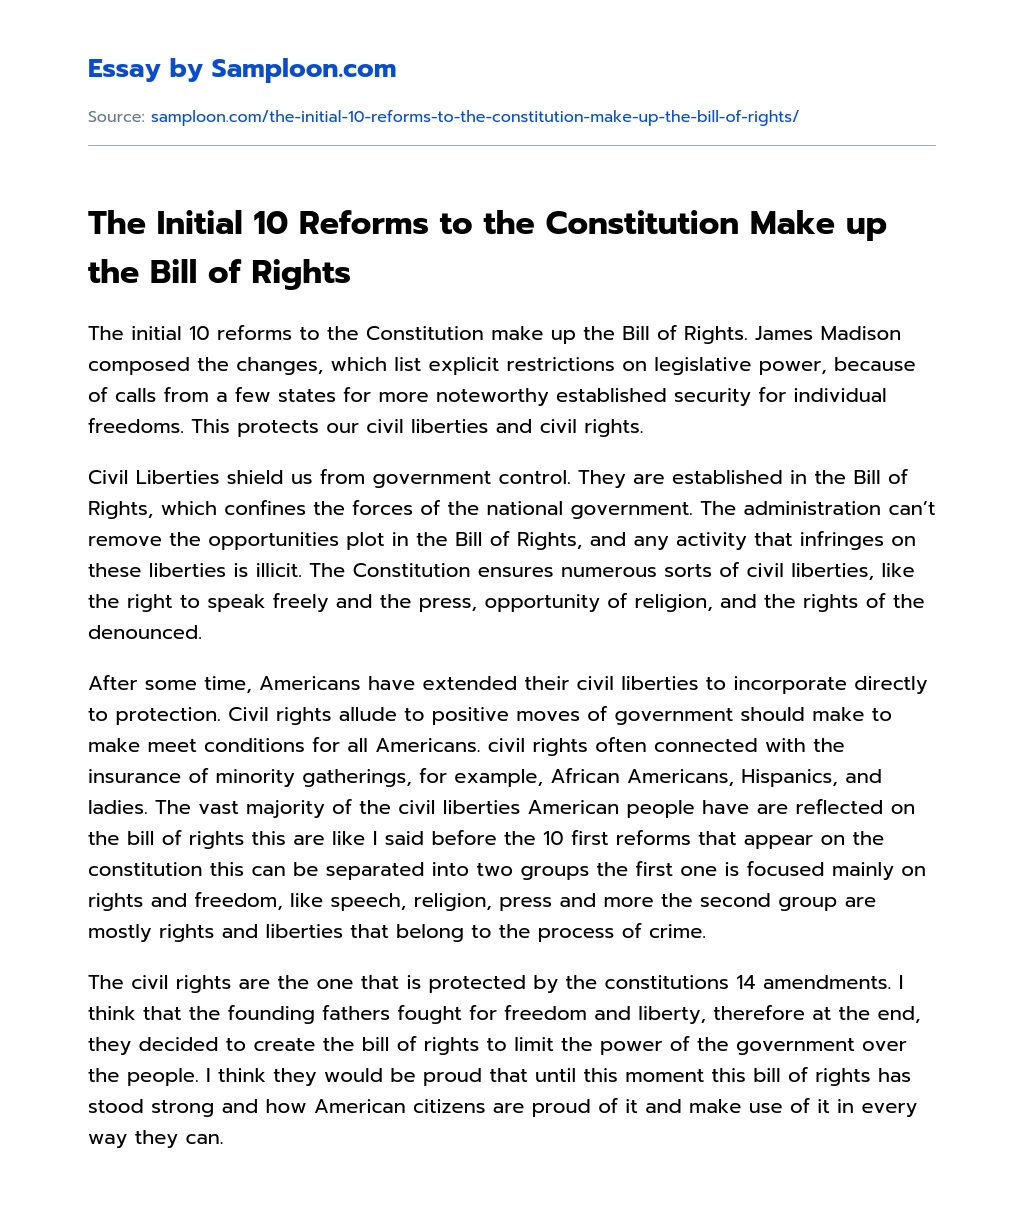 The Initial 10 Reforms to the Constitution Make up the Bill of Rights essay